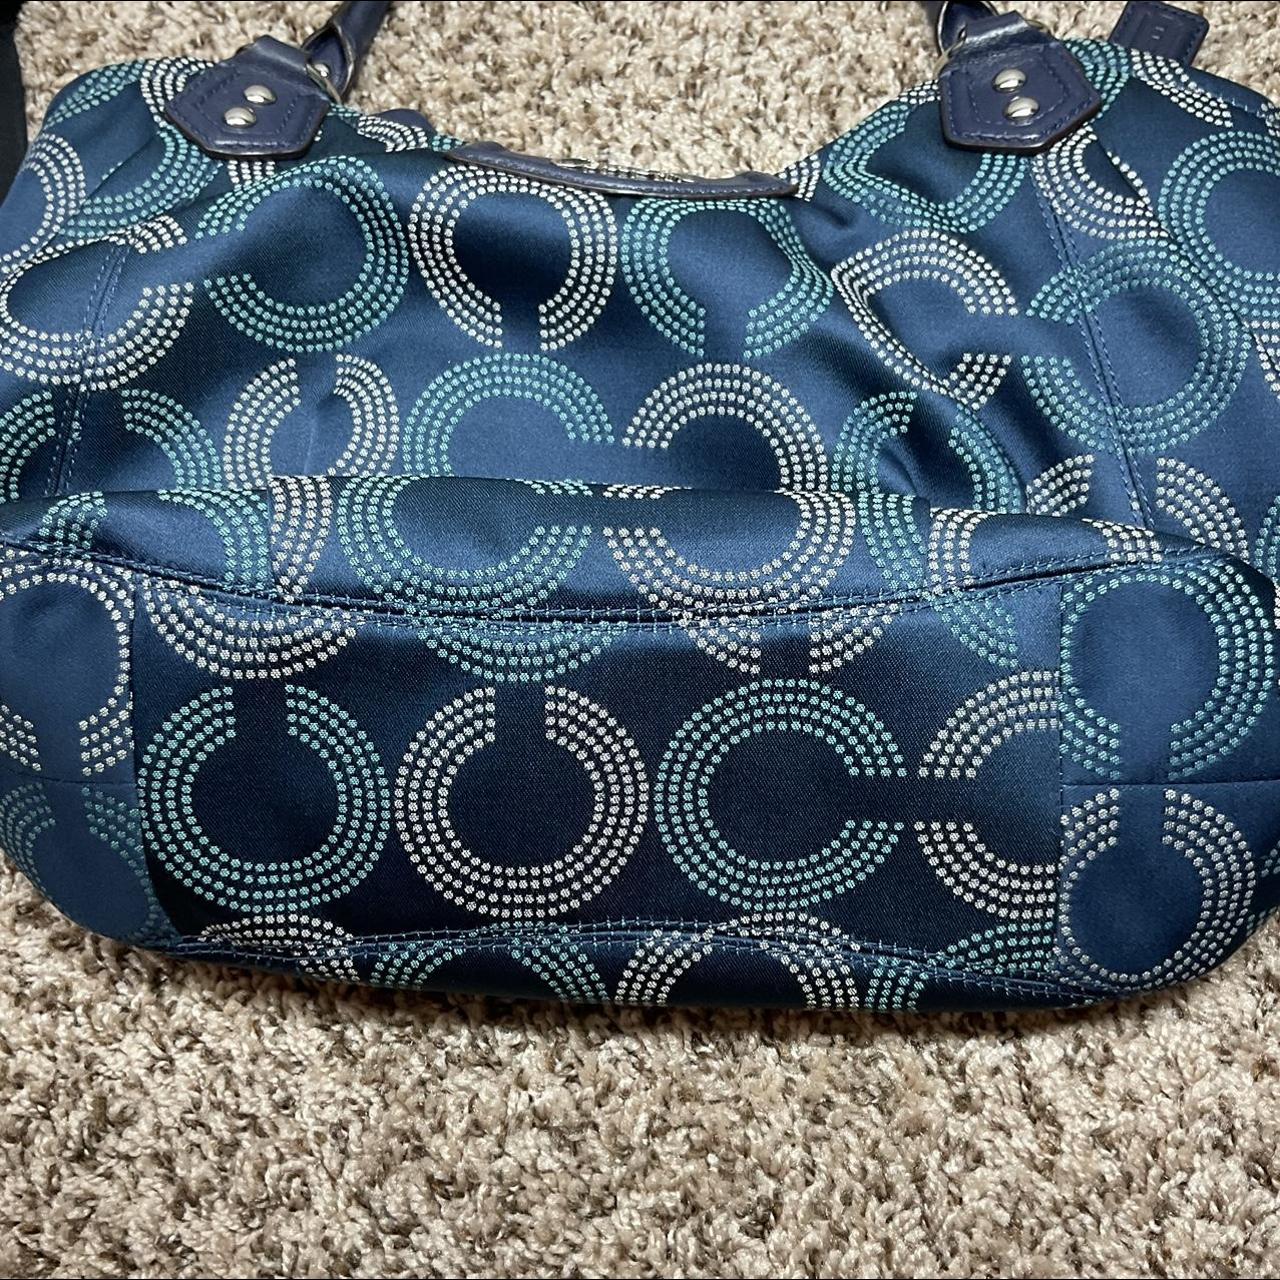 Big purse, perfect for daytime going out, holds a - Depop